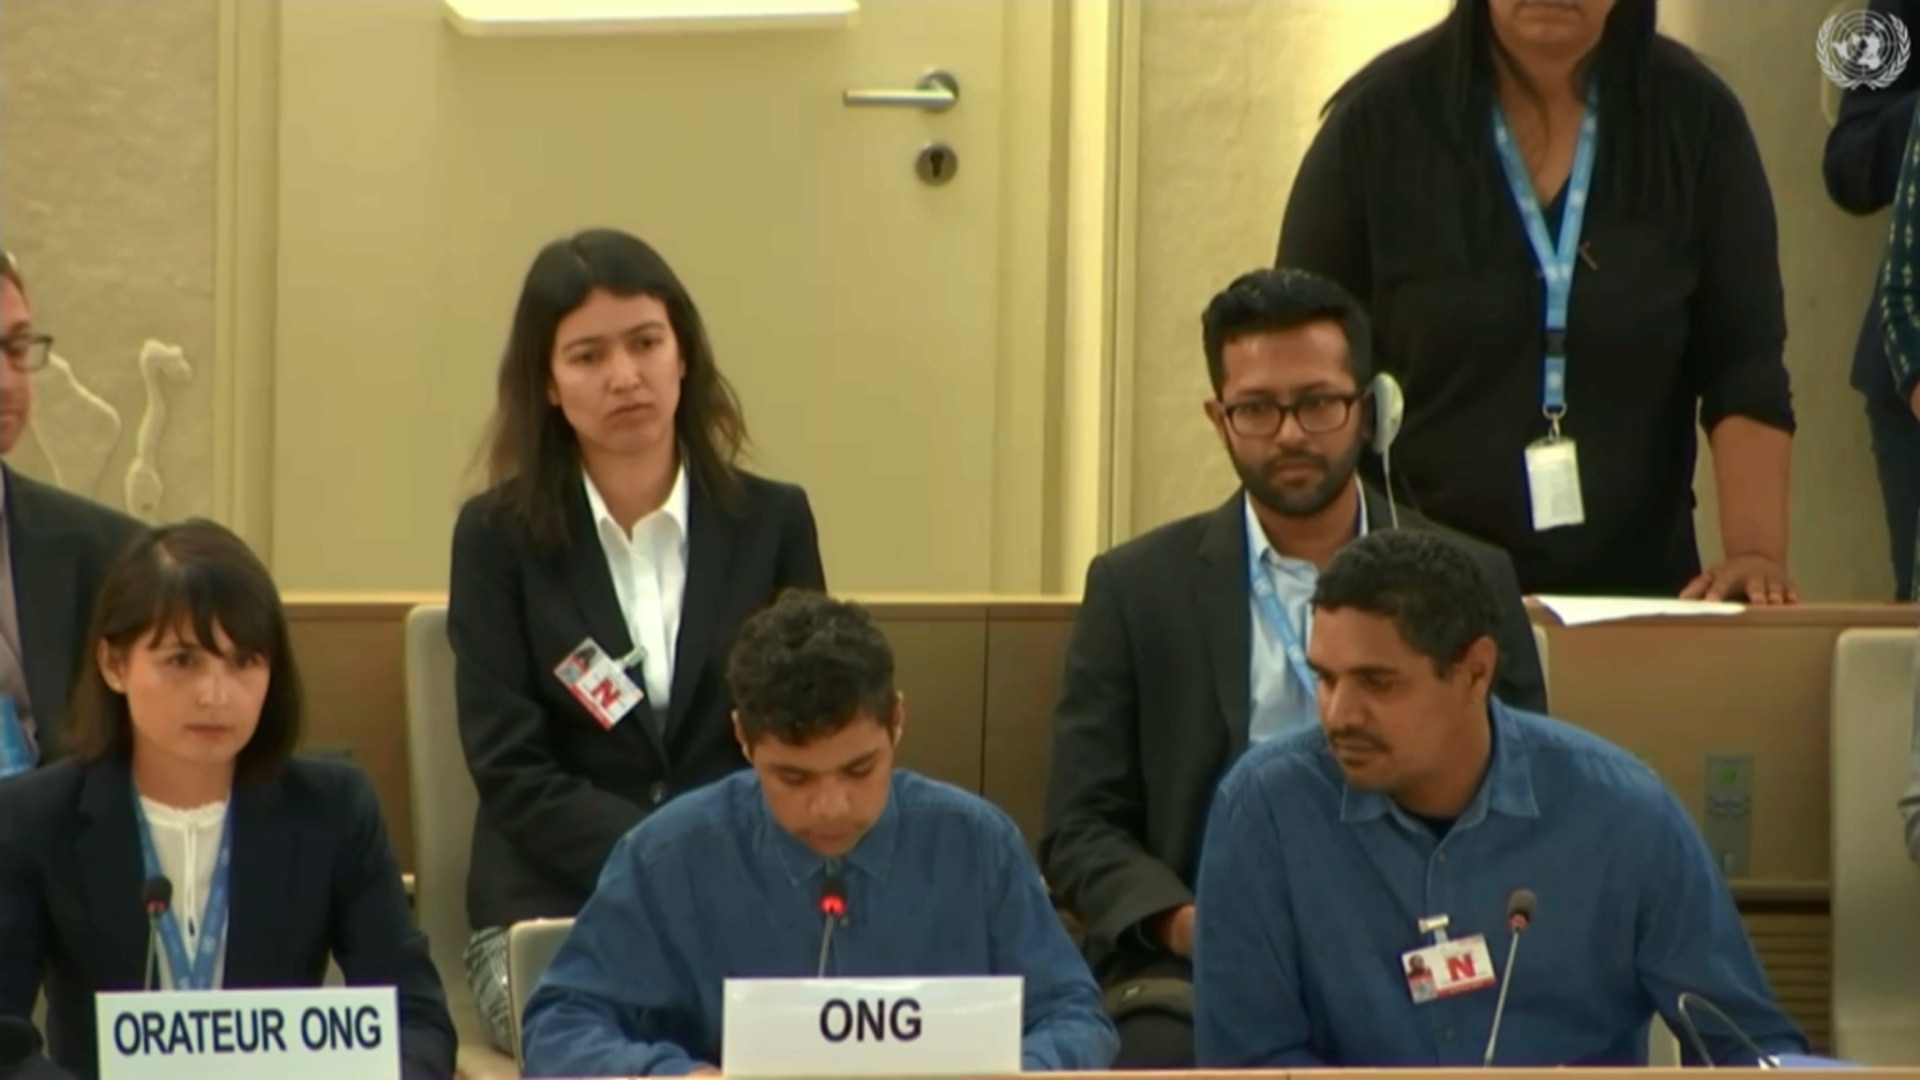 Dujuan Hoosan told the UN Human Rights Council that he wants 'adults to stop putting 10-year-olds in jail'.